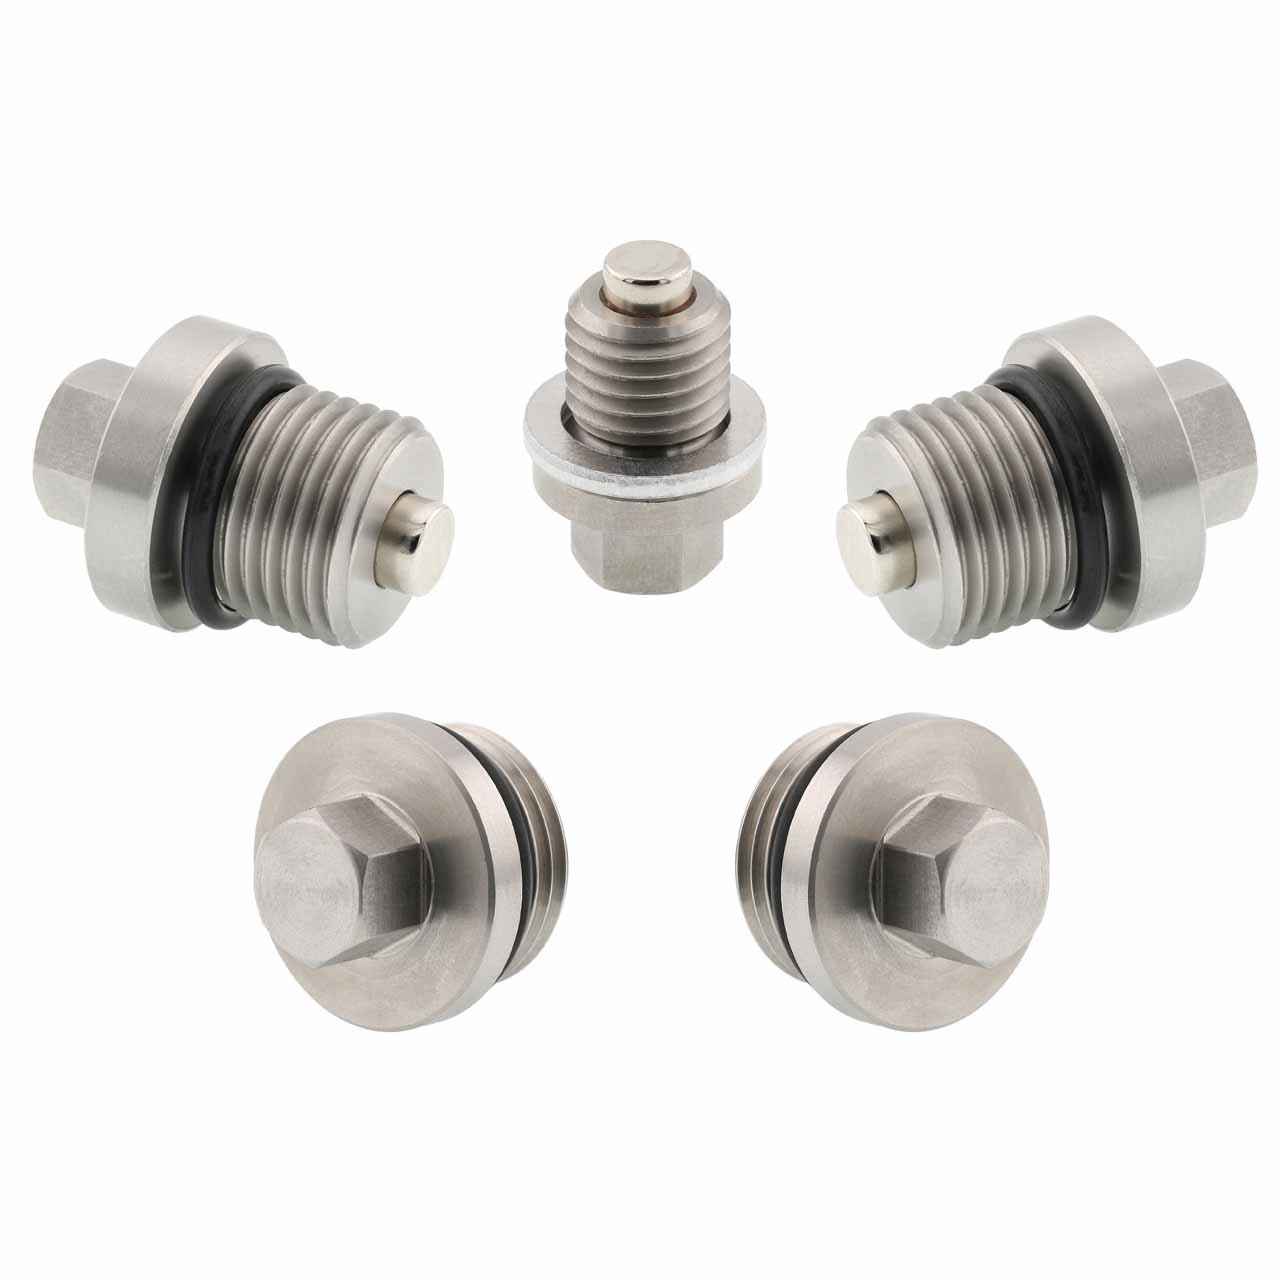 Polaris RZR 570 EPS Trail Magnetic Oil Drain Plug Kit - 2014-2016 - Engine, Transmission, Differential - Made In USA